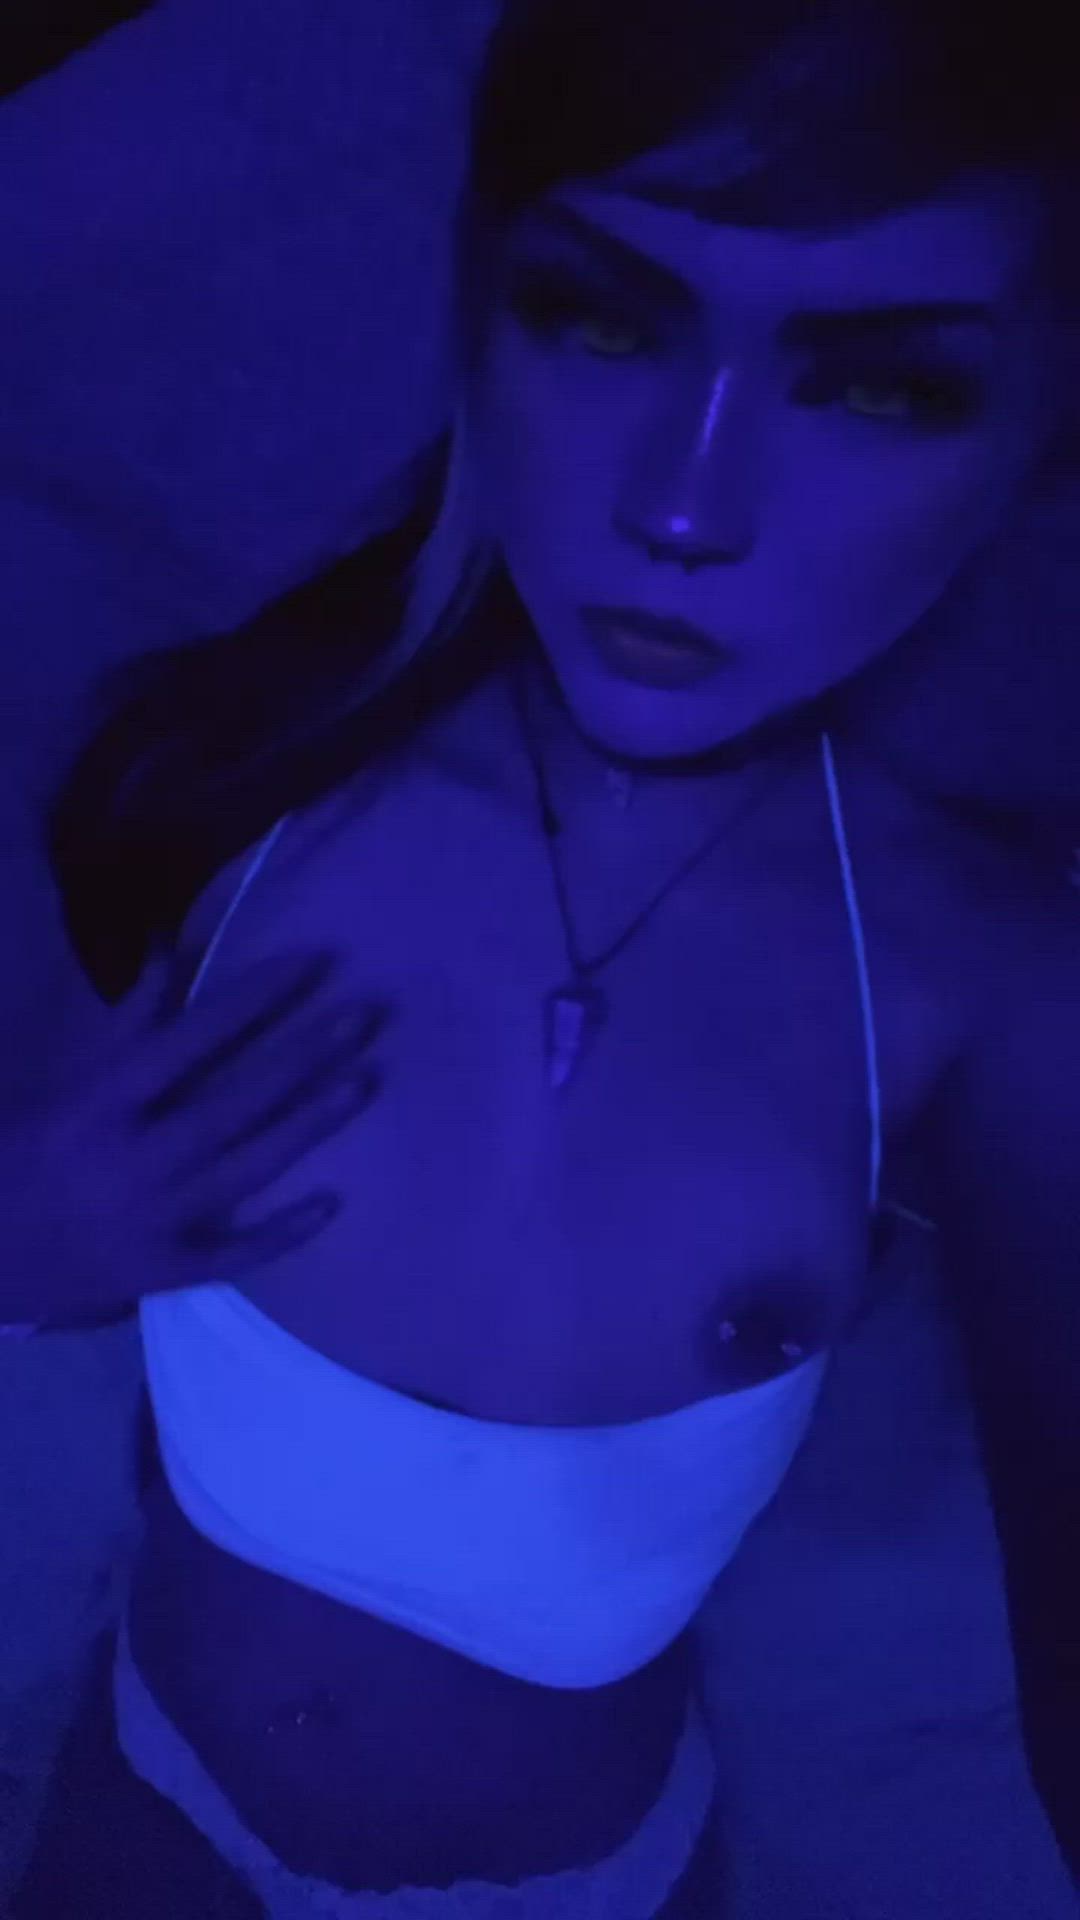 Amateur porn video with onlyfans model thebabygoul <strong>@thebabyghooul</strong>